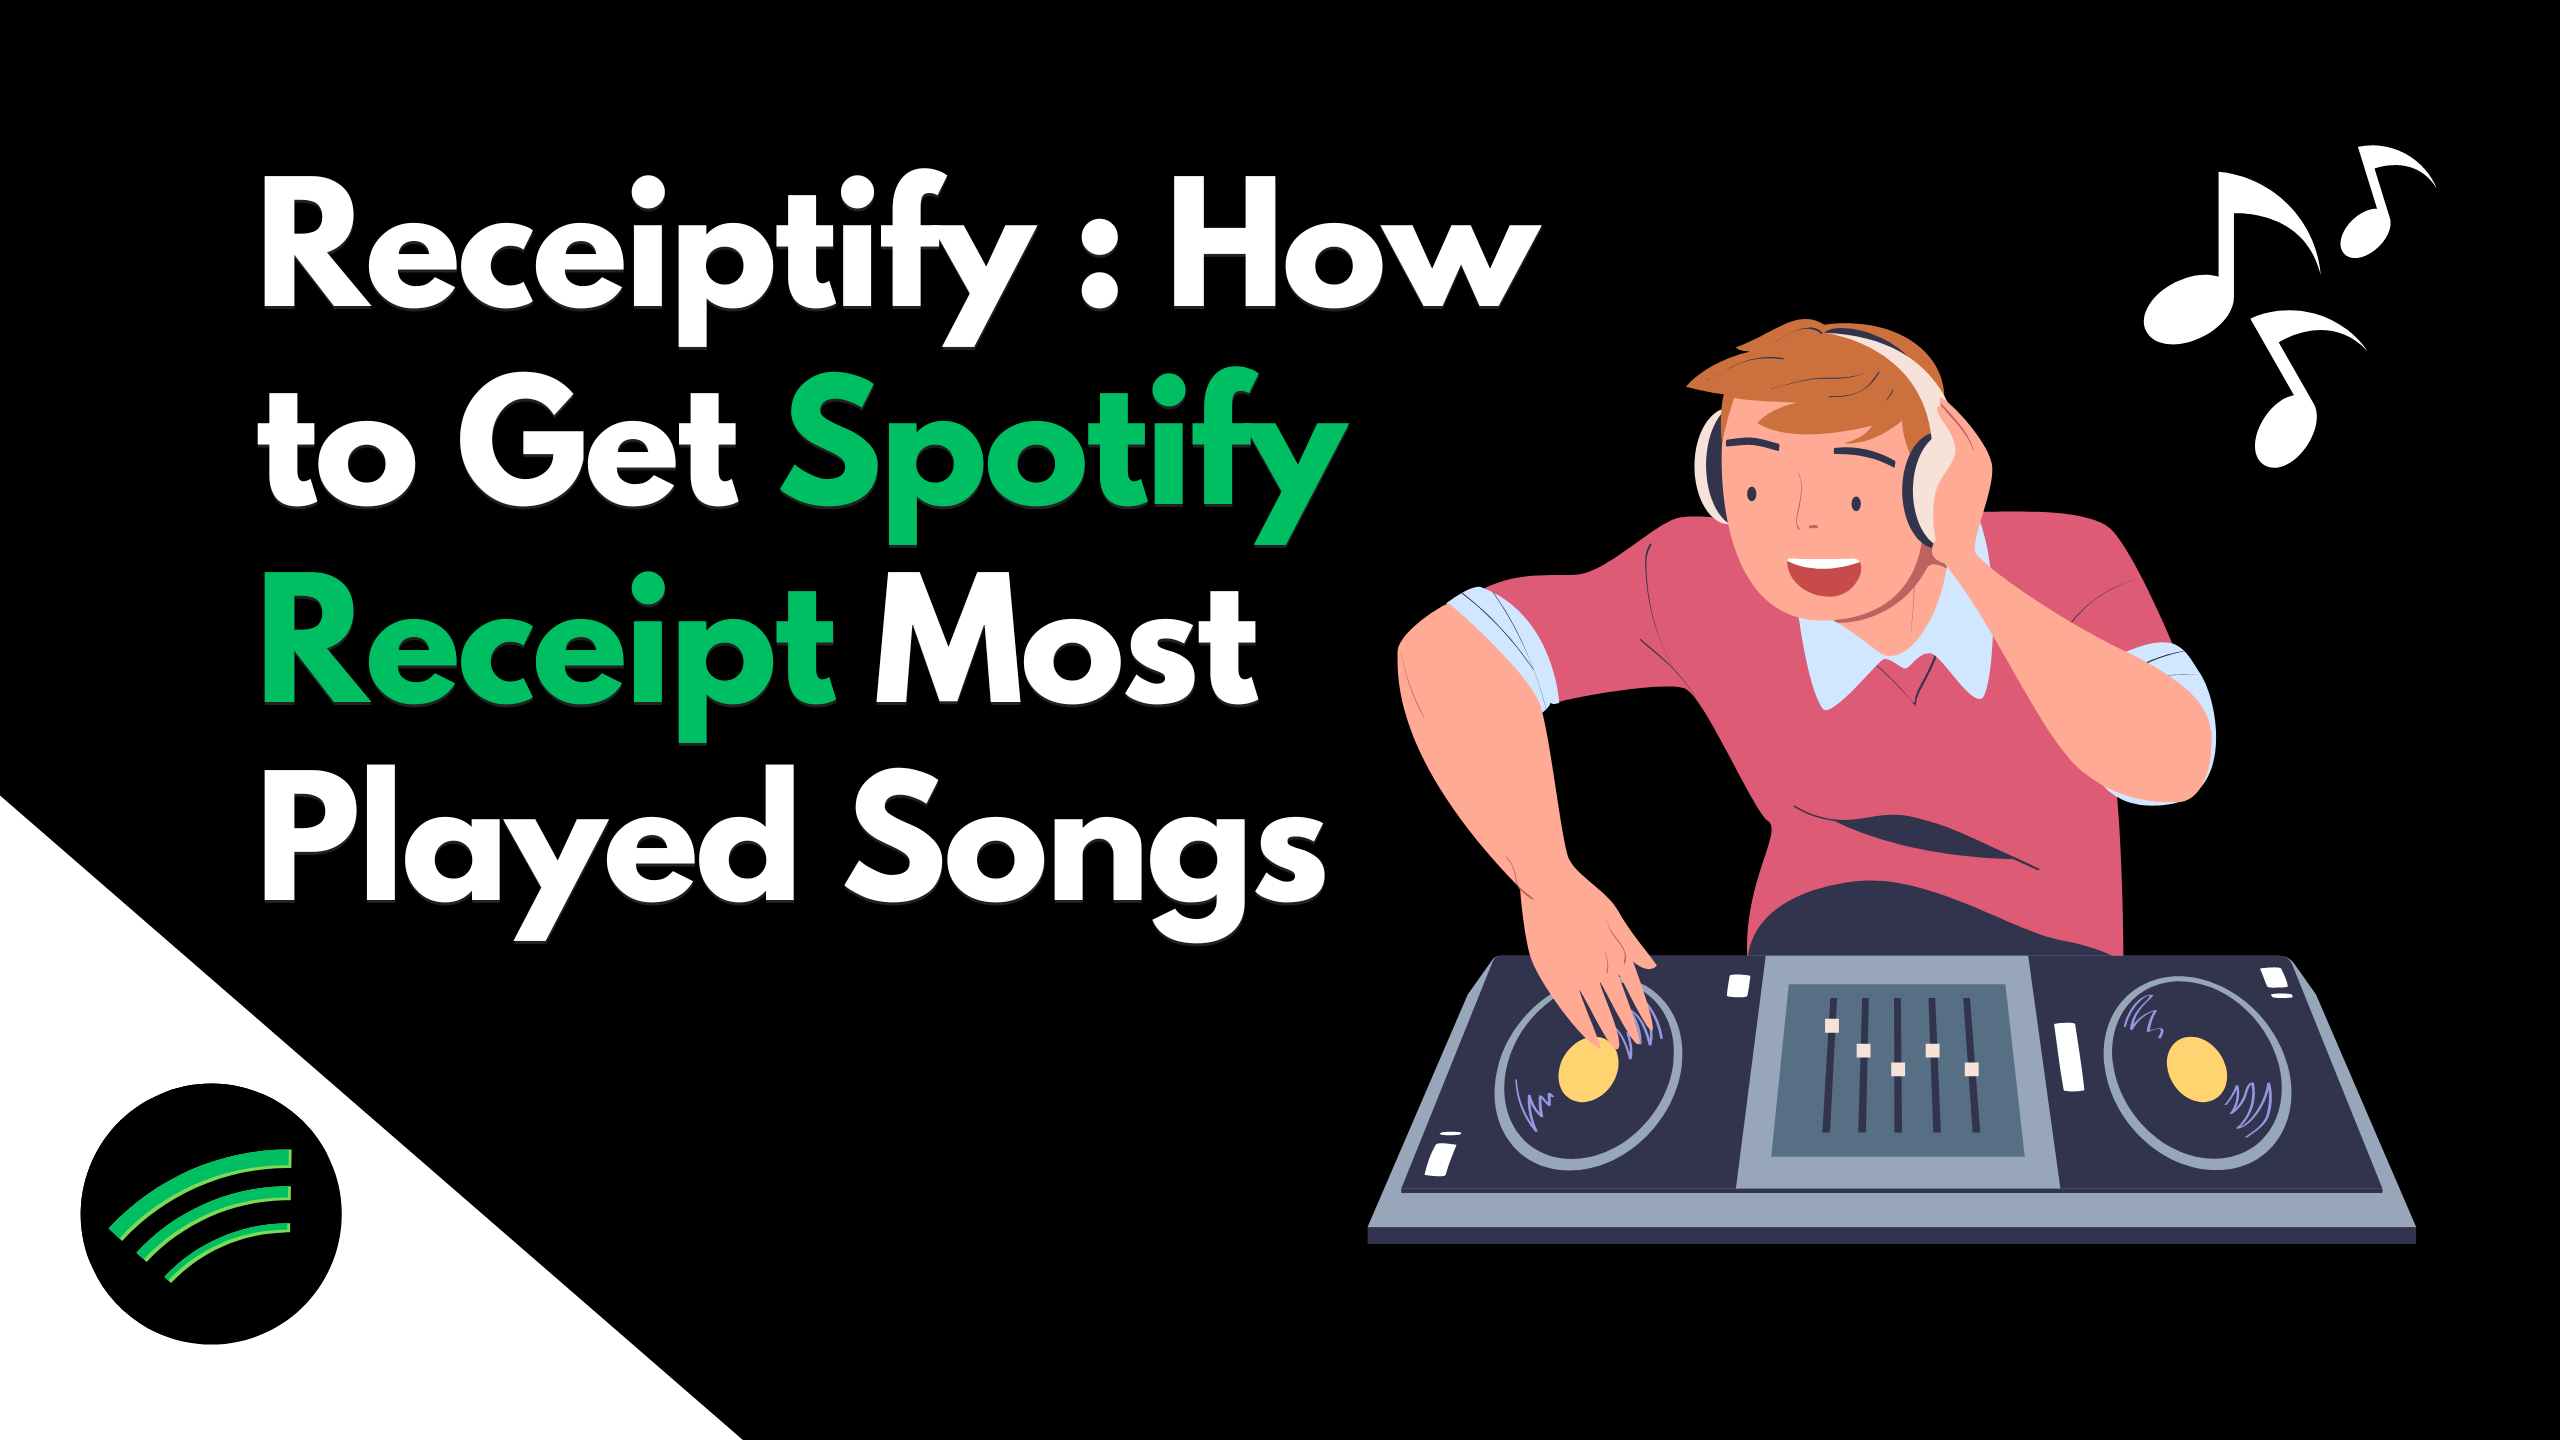 Get Spotify Receipt Most Played Songs